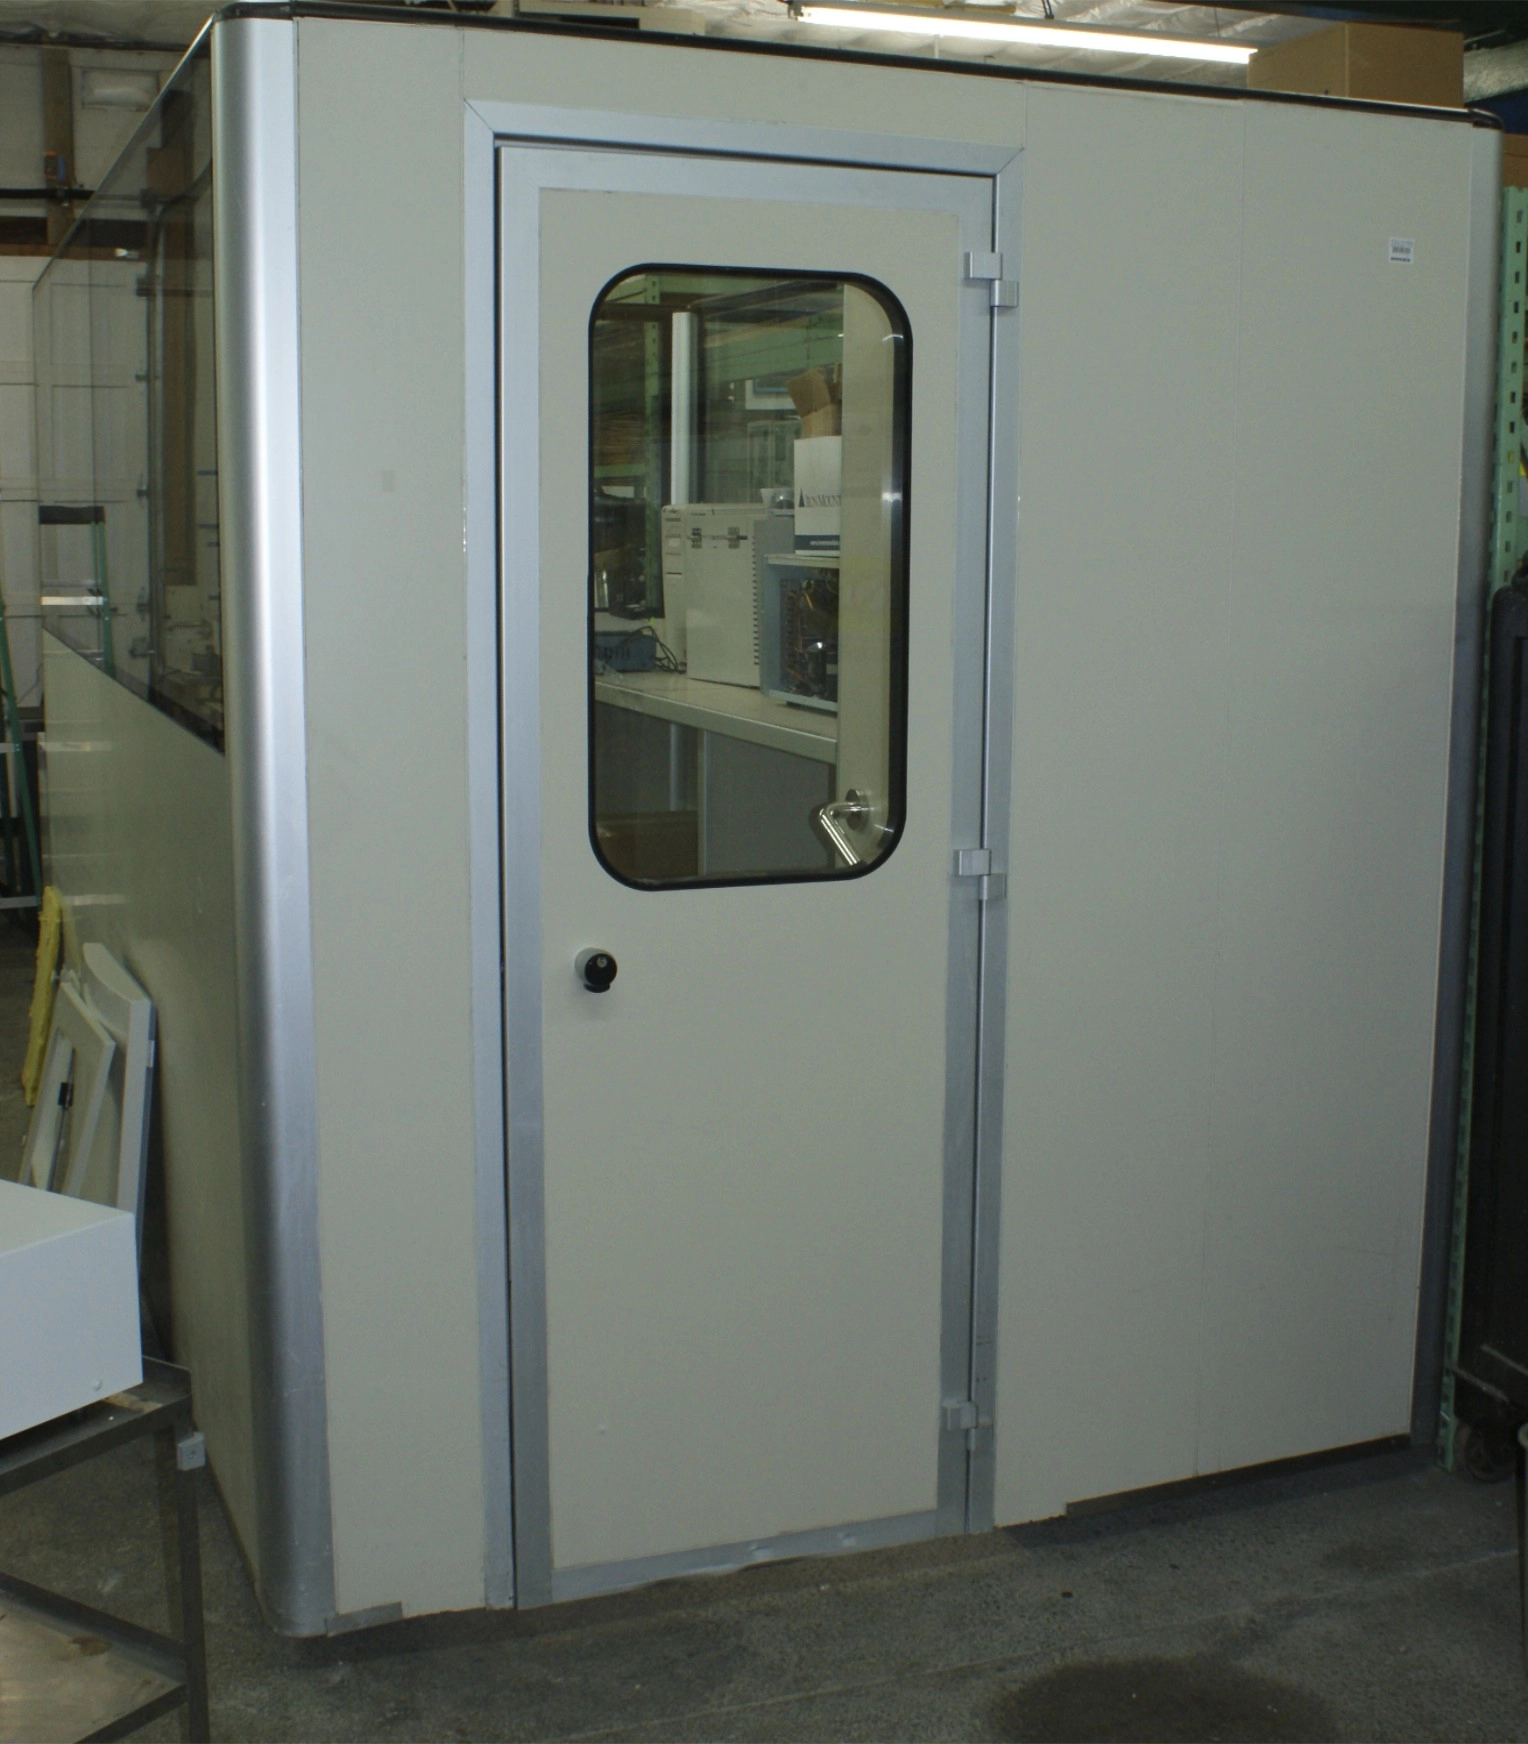 Work Space Enclosure Portable Room with Built-in Bench